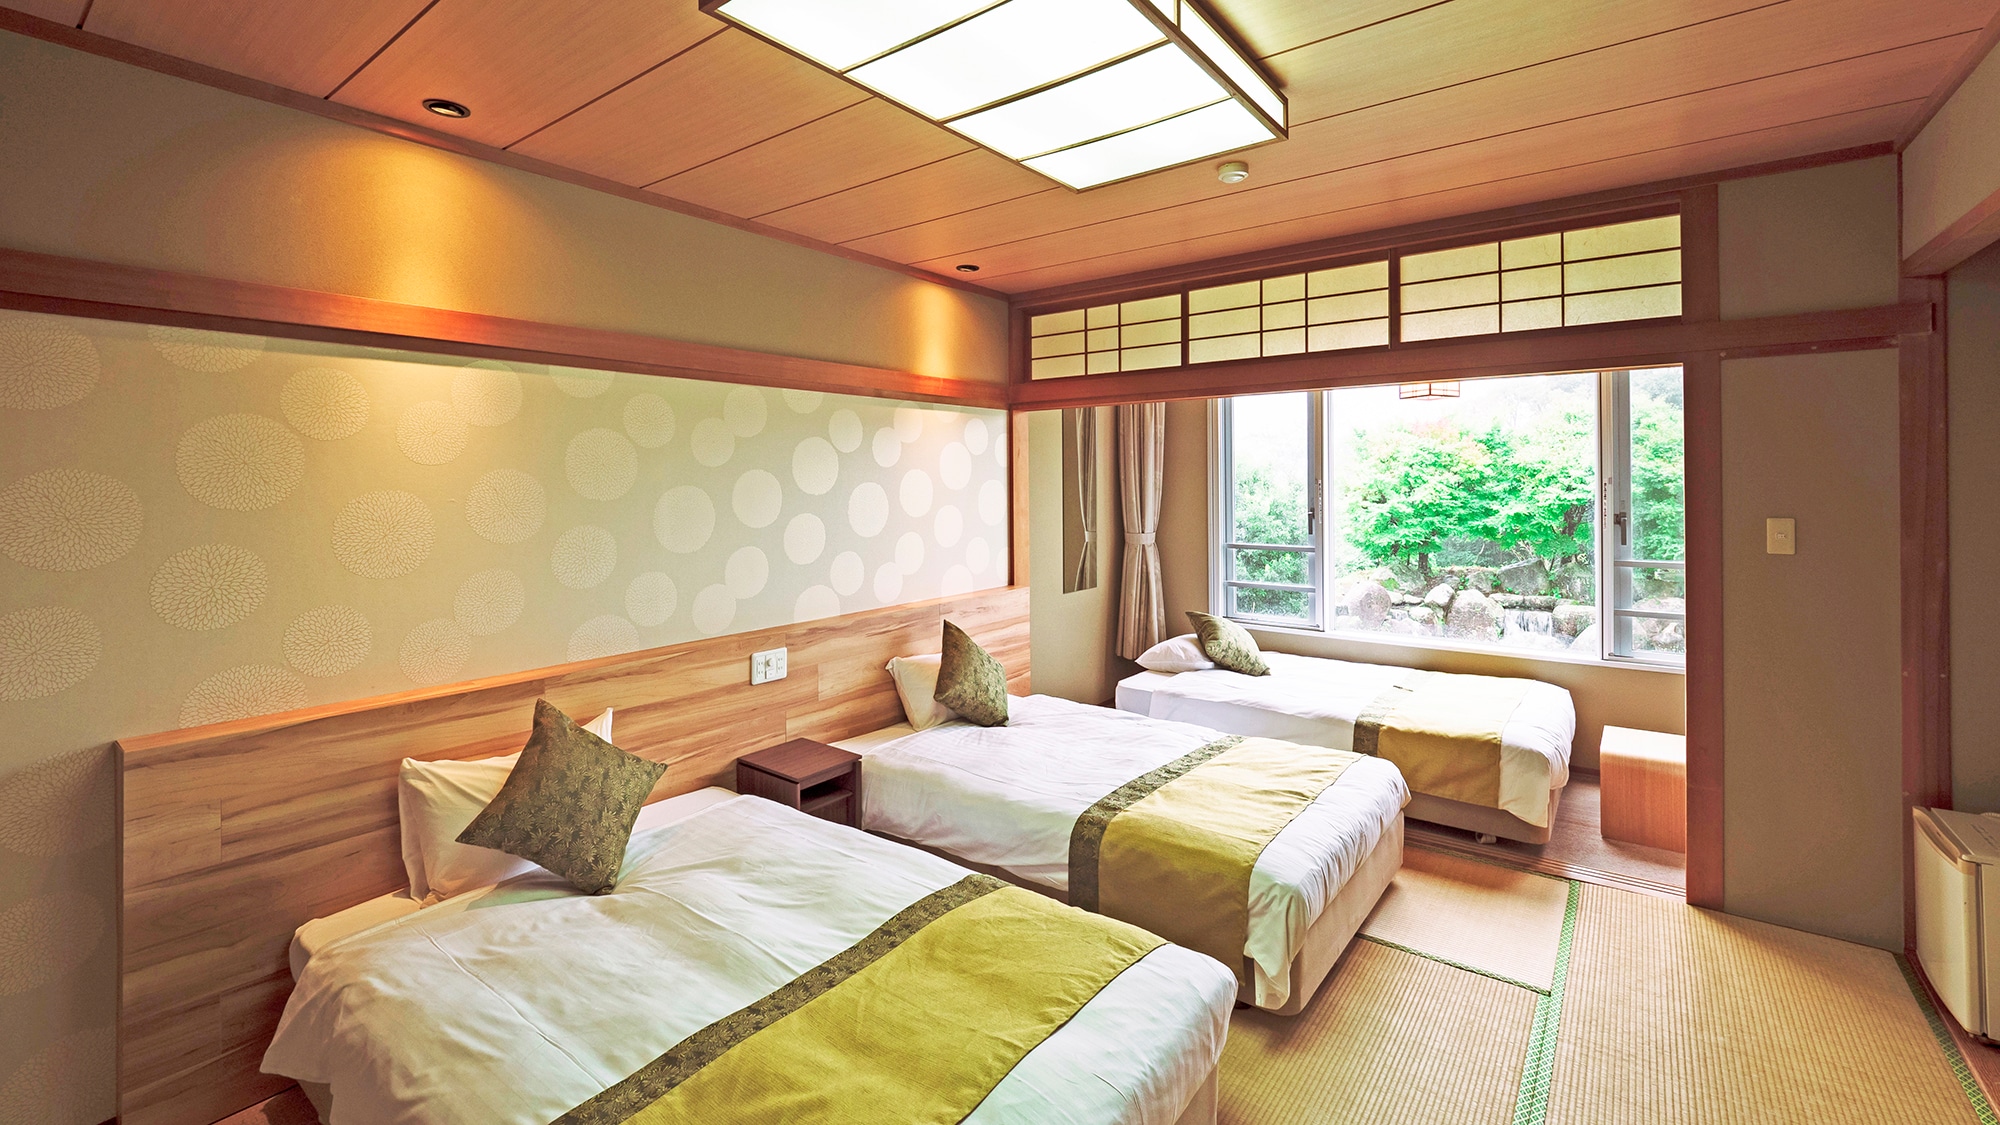 [Japanese-style triple] 10 tatami mats ◆ 2 120 cm beds and 1 sofa bed